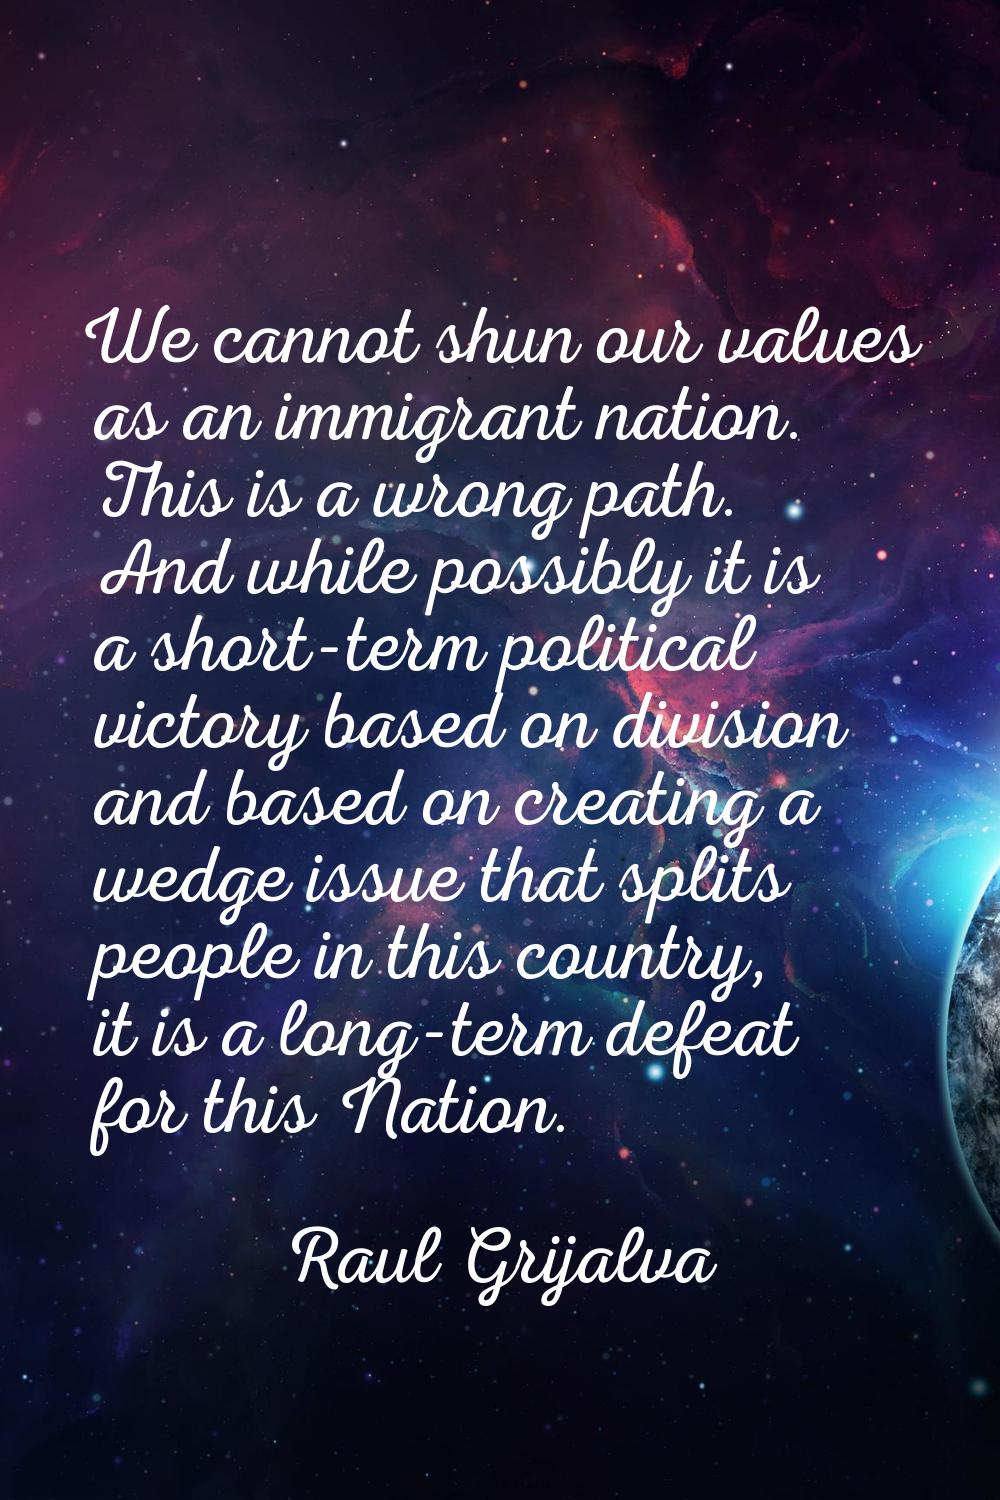 We cannot shun our values as an immigrant nation. This is a wrong path. And while possibly it is a 